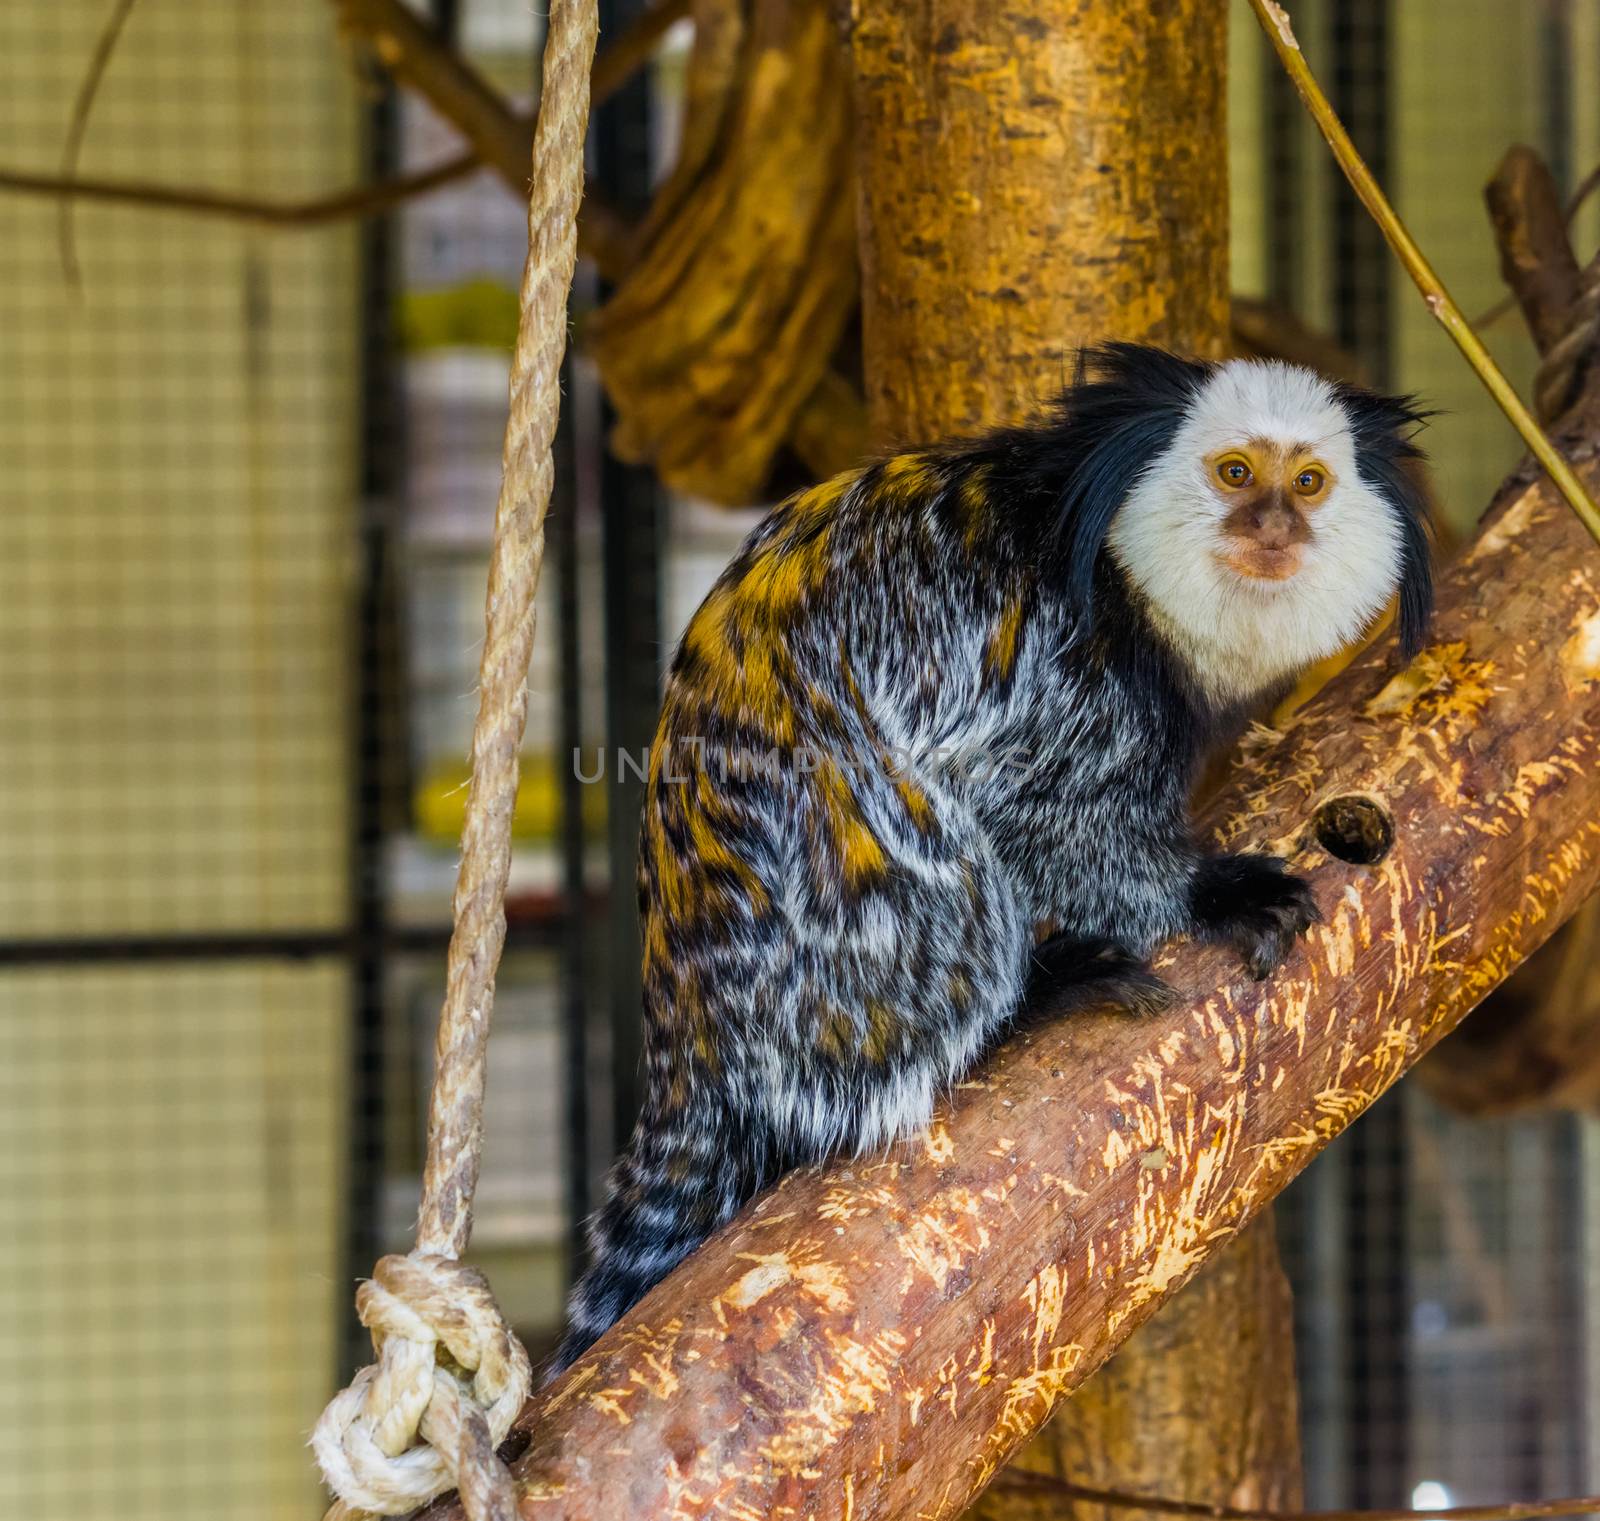 white headed marmoset, a popular monkey from Brazil, exotic cute pets